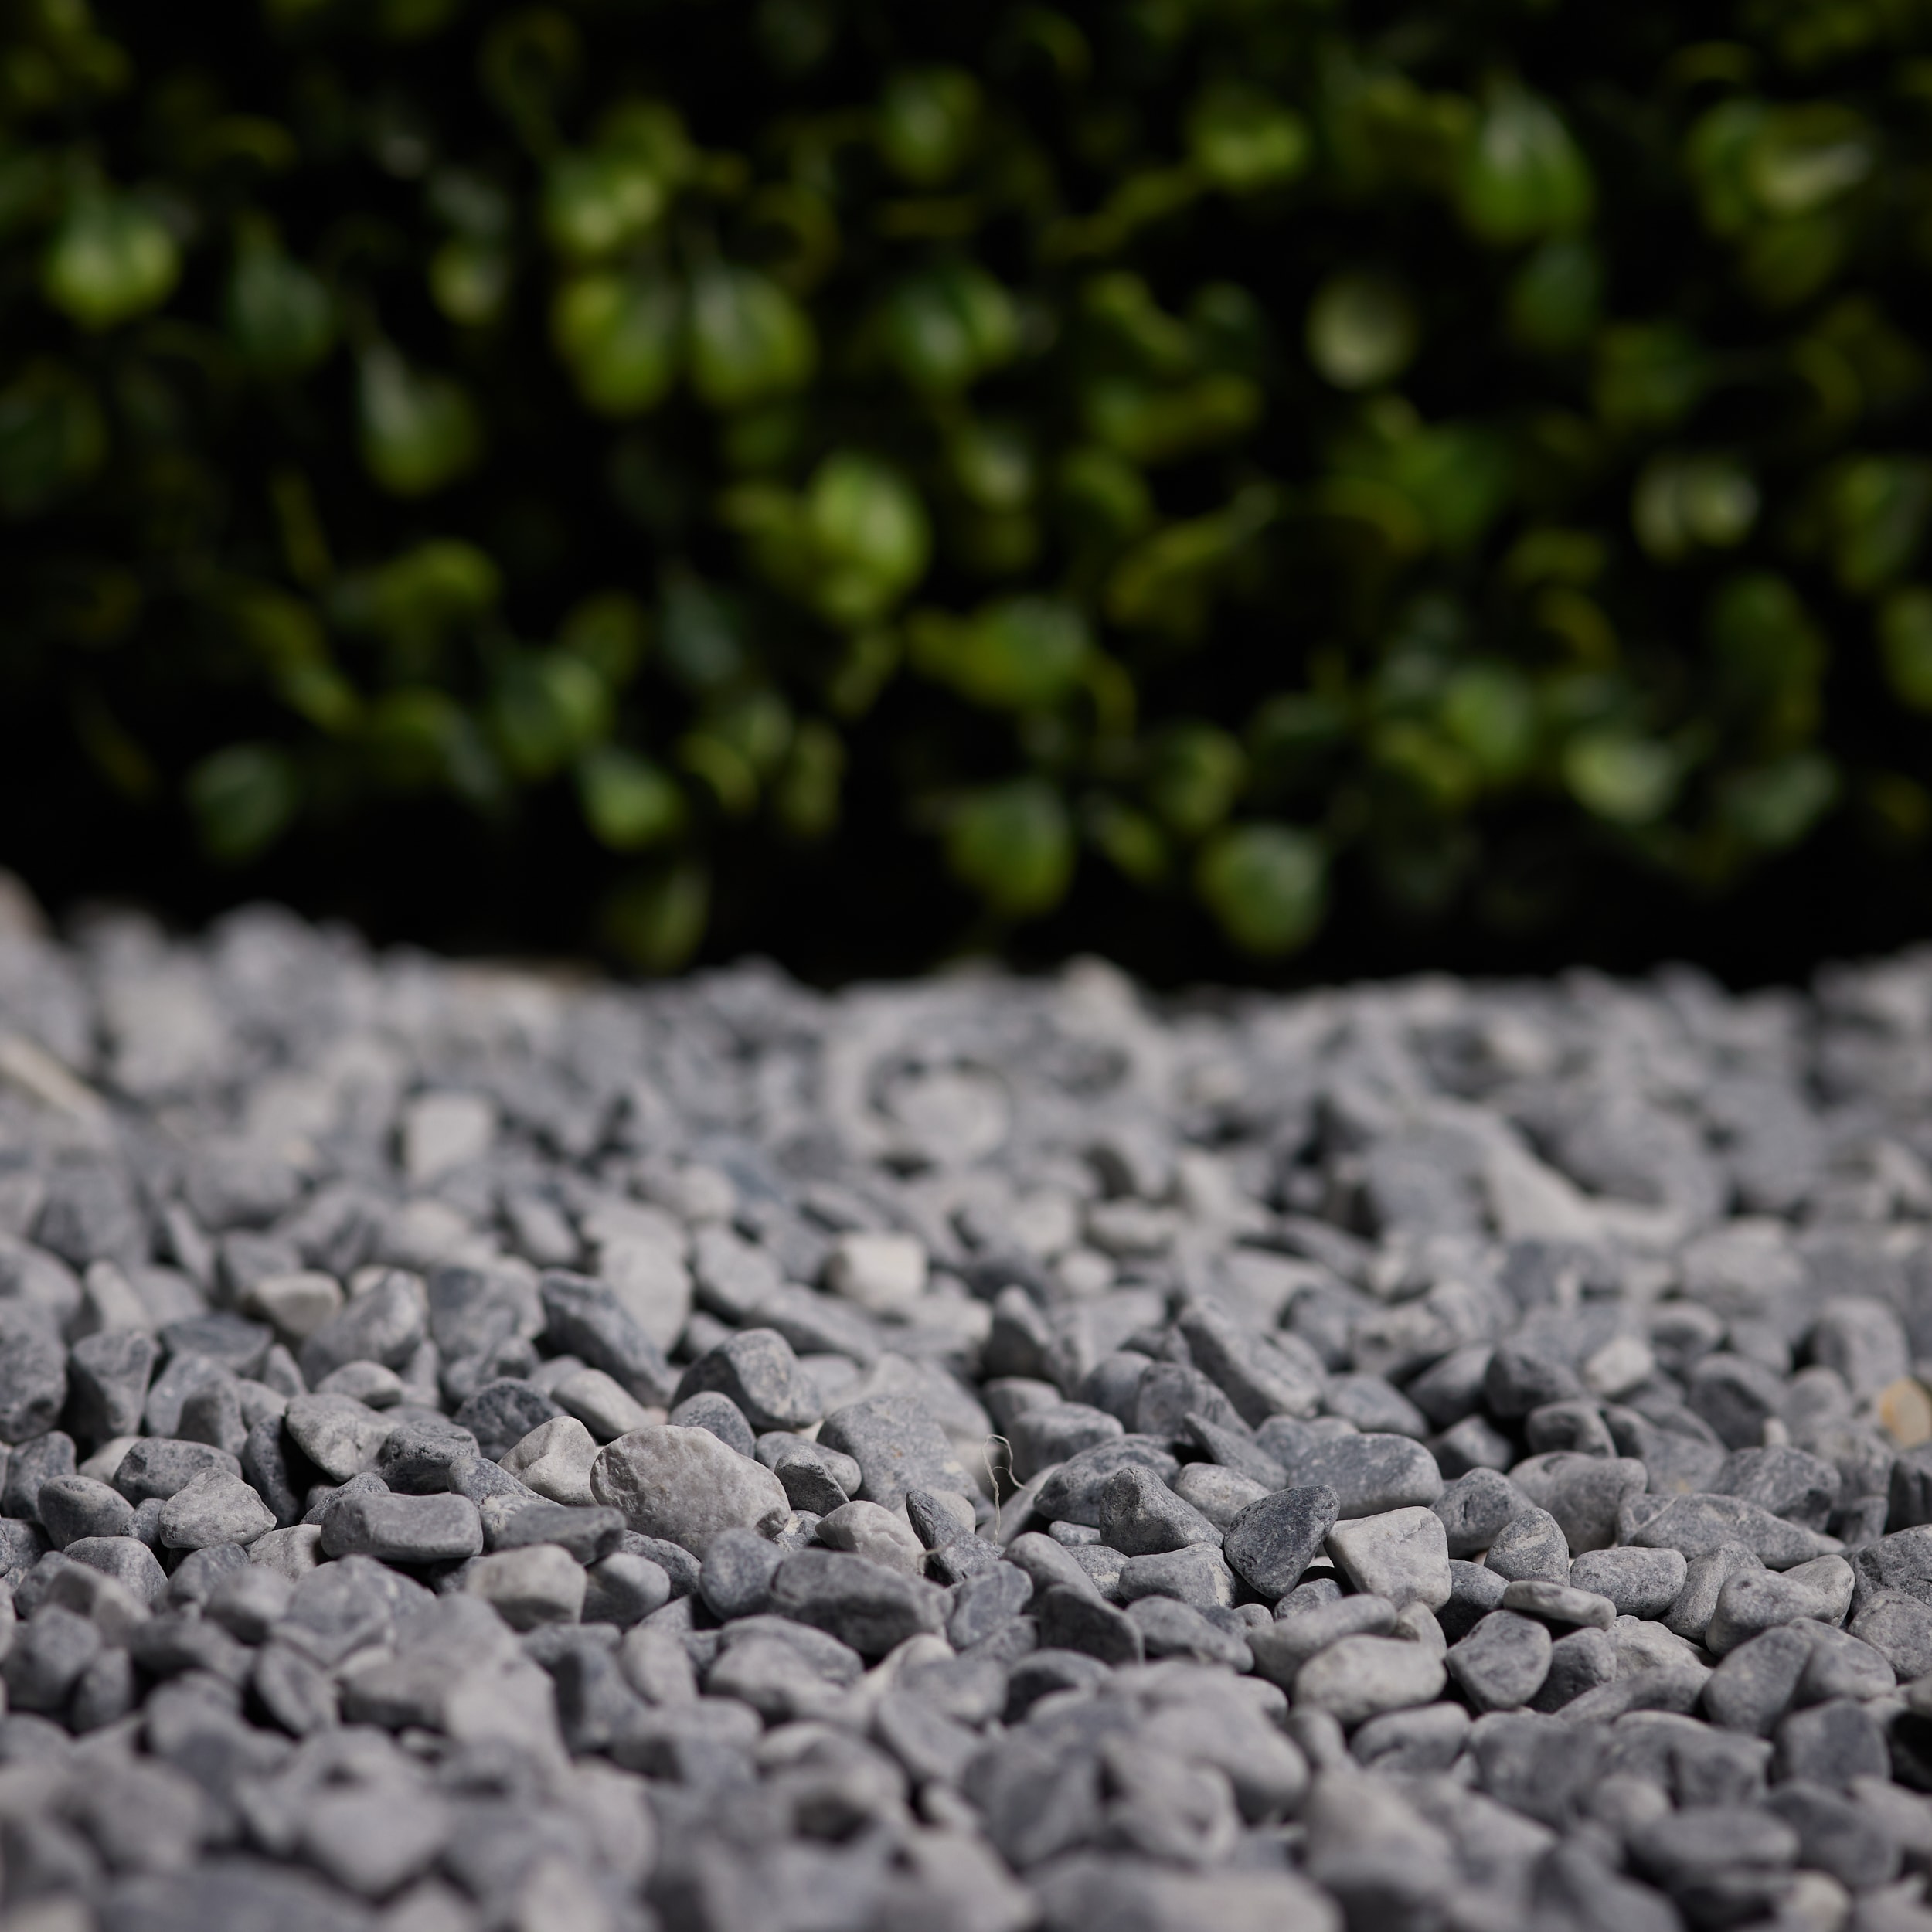 Rain Forest Rain Forest Black Slate 1 in 30 lbs in the Landscaping Rock  department at